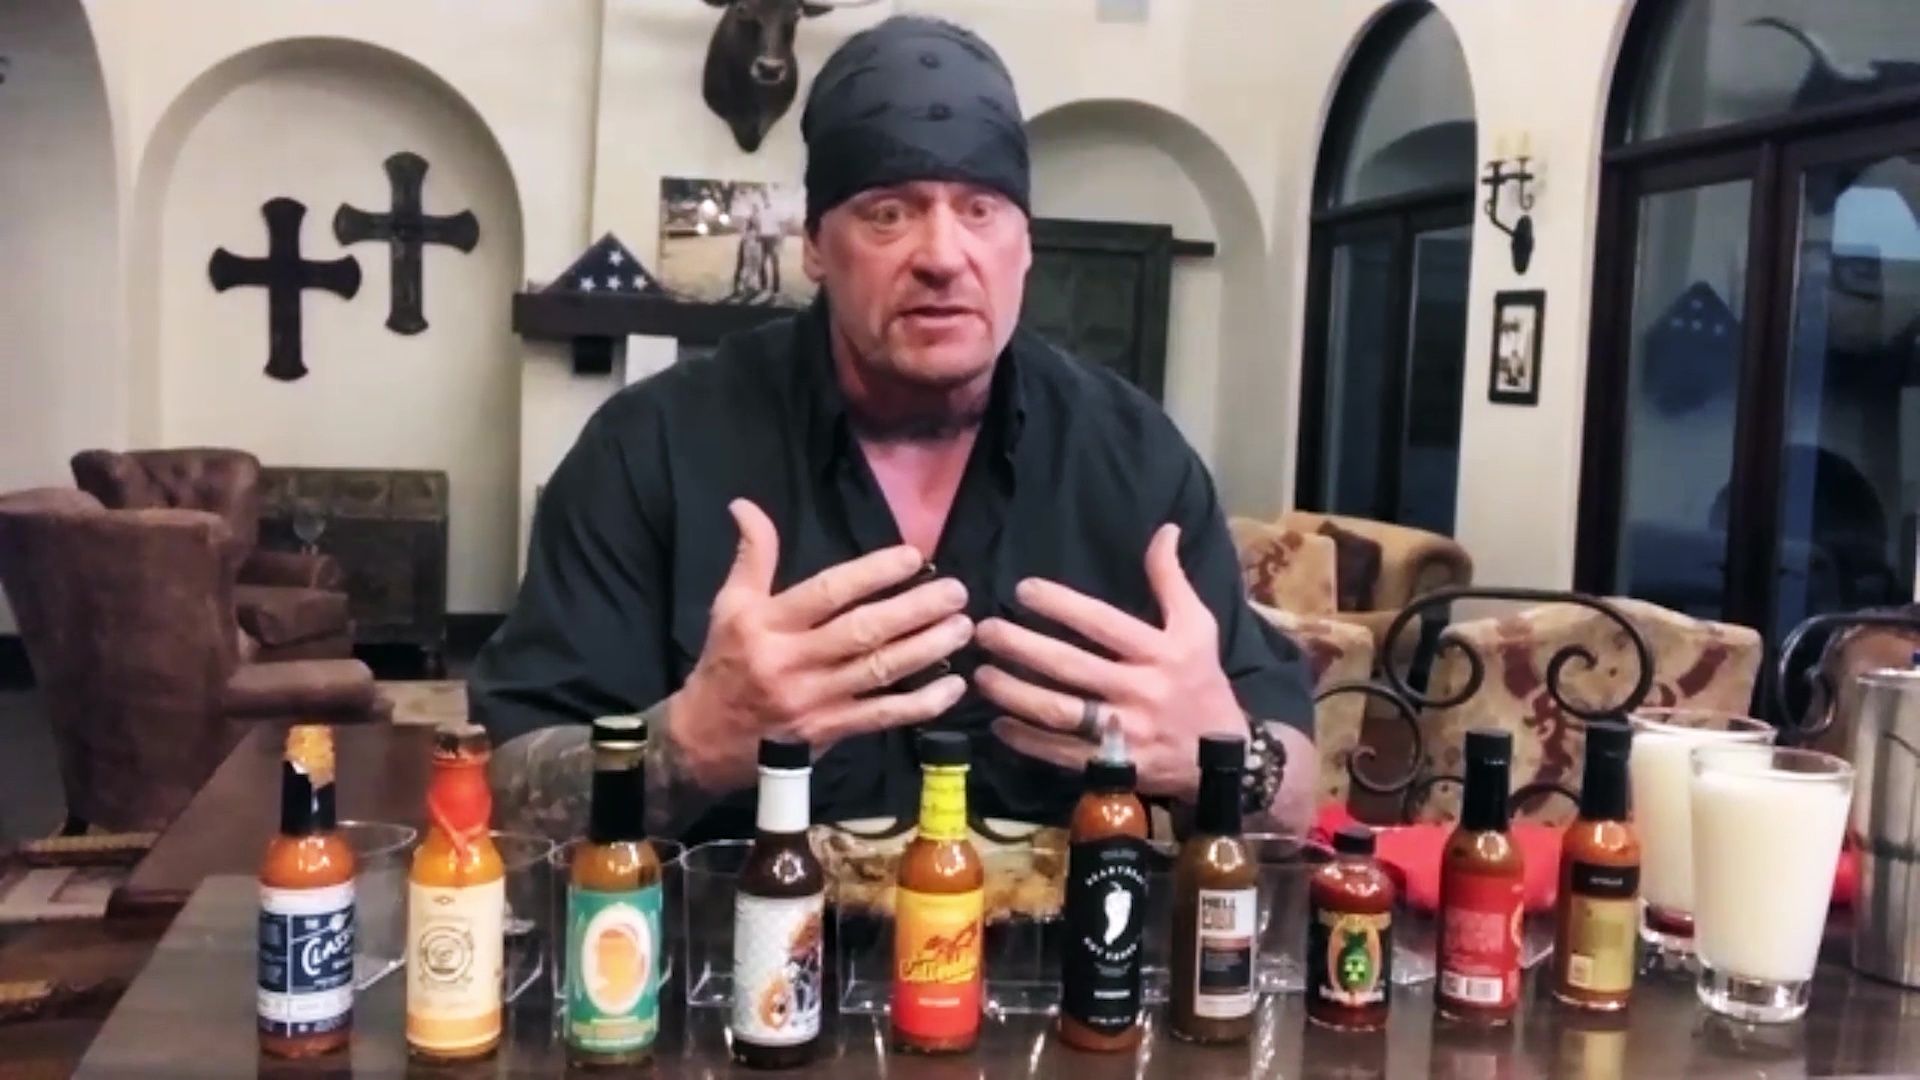 The Undertaker Takes Care of Business While Eating Spicy Wings